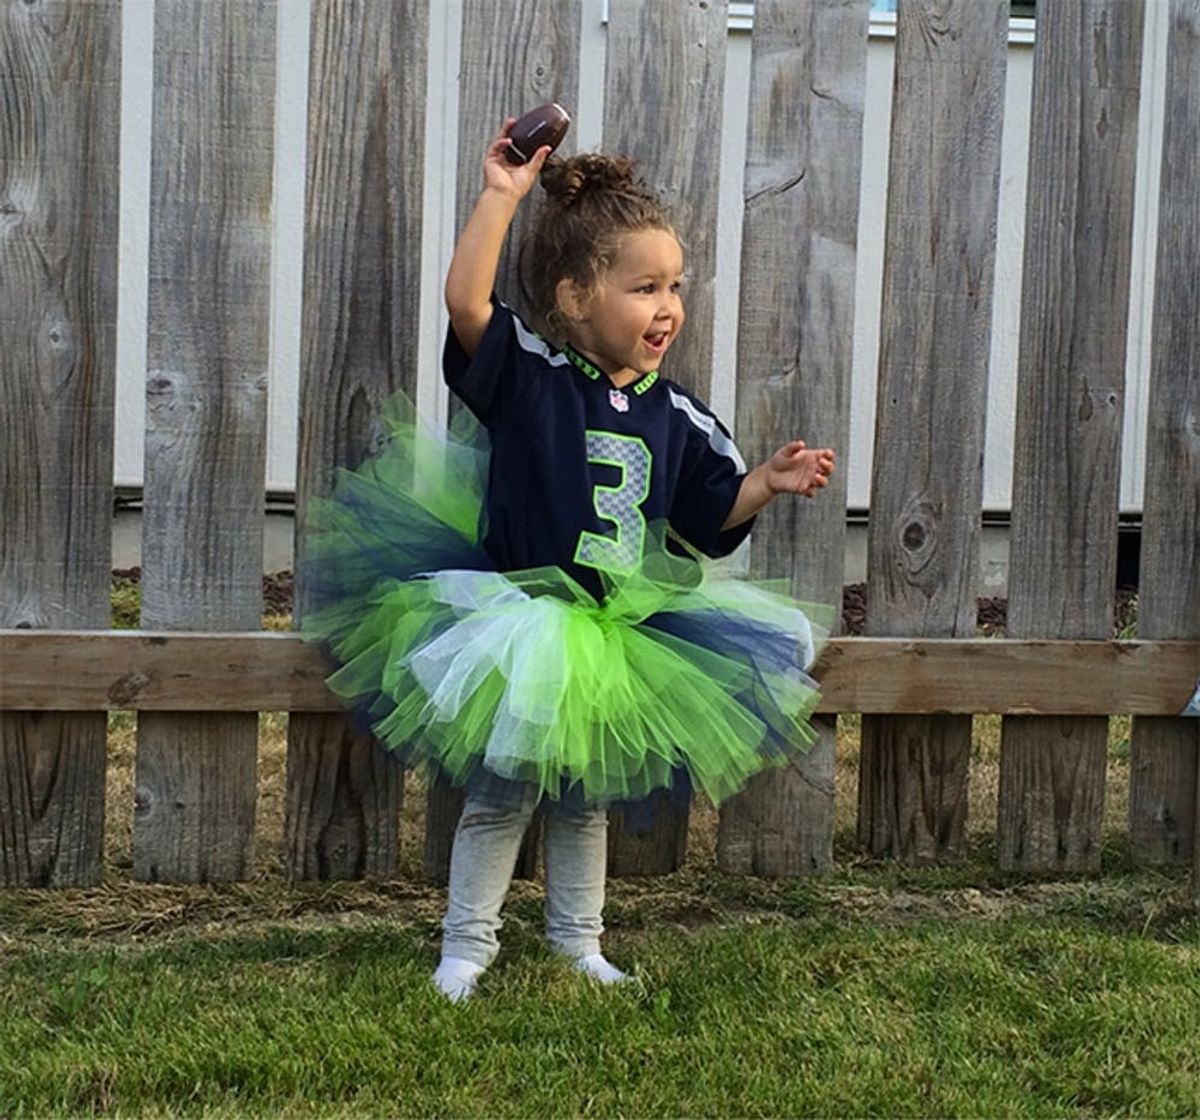 12 Winning Looks for Your Kids This Super Bowl Sunday